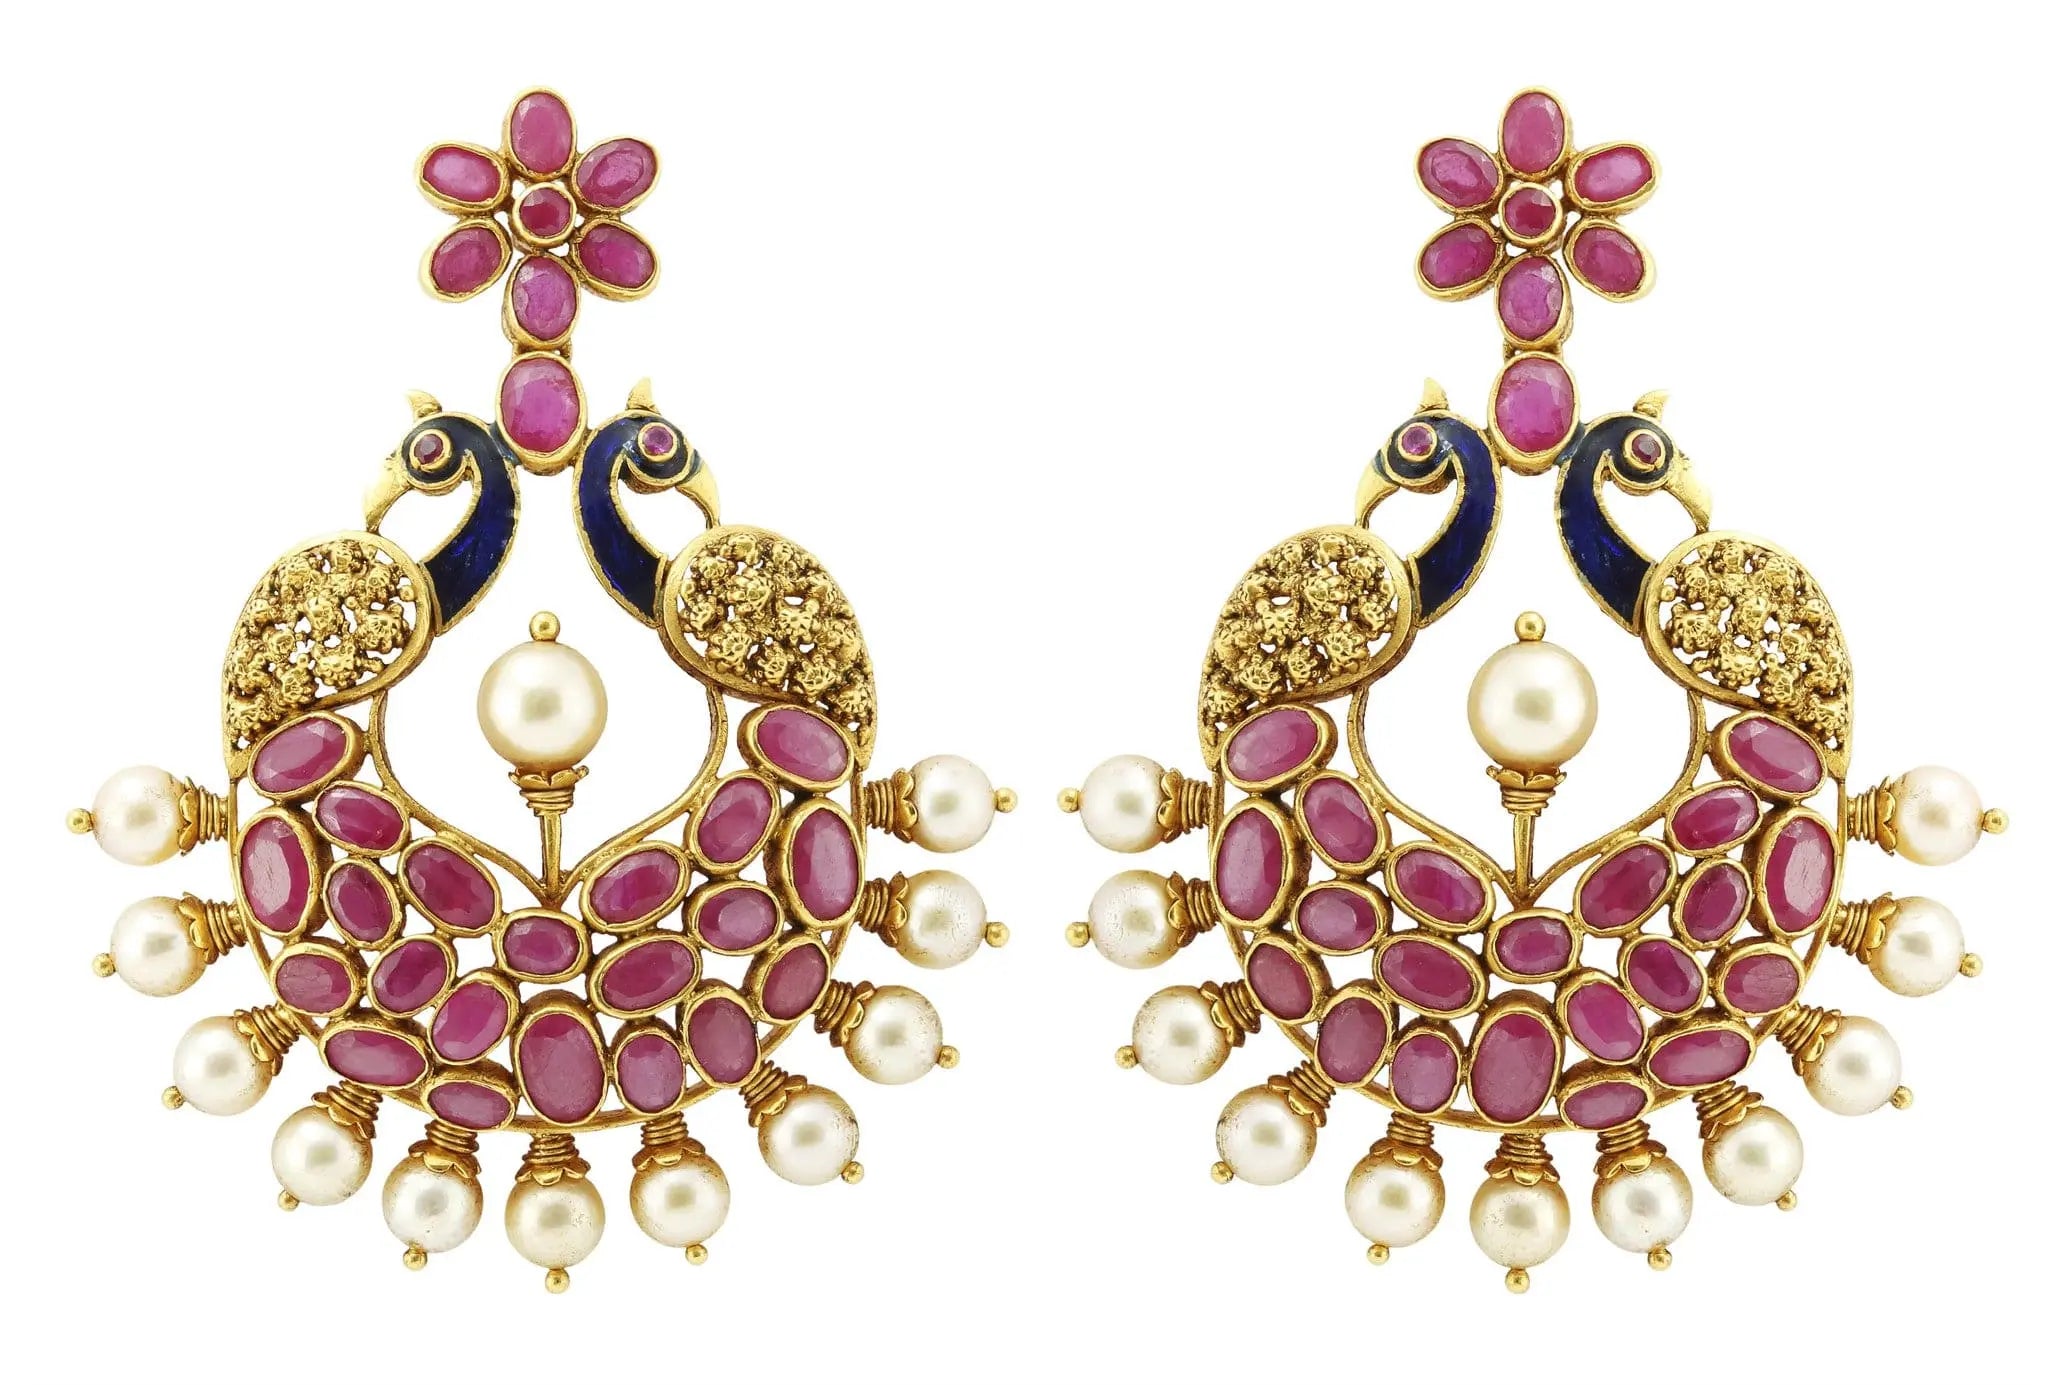 Flipkart.com - Buy AlamodFashion Filigree Alloy Festive Gold Plated Alloy Chandbali  Earring Online at Best Prices in India